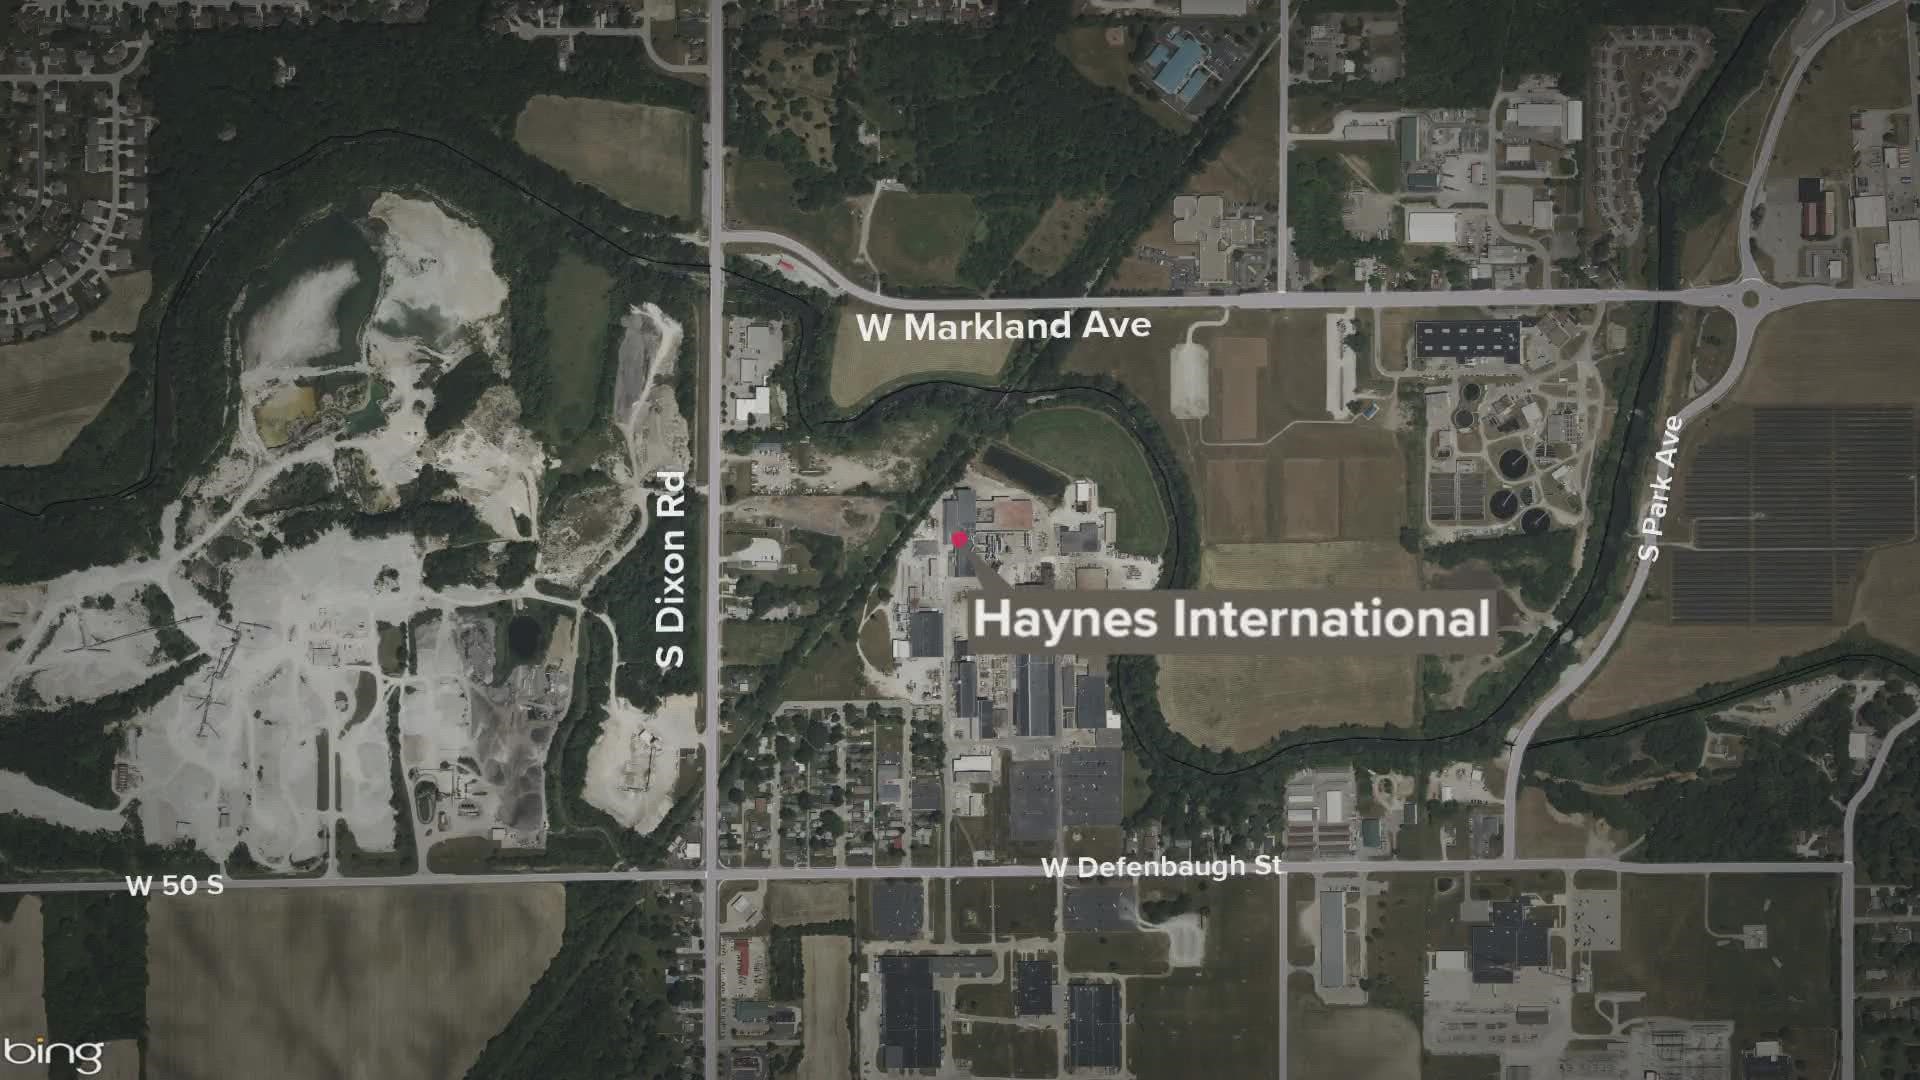 We're learning Kokomo police are investigating an employee's death at Hayes International.